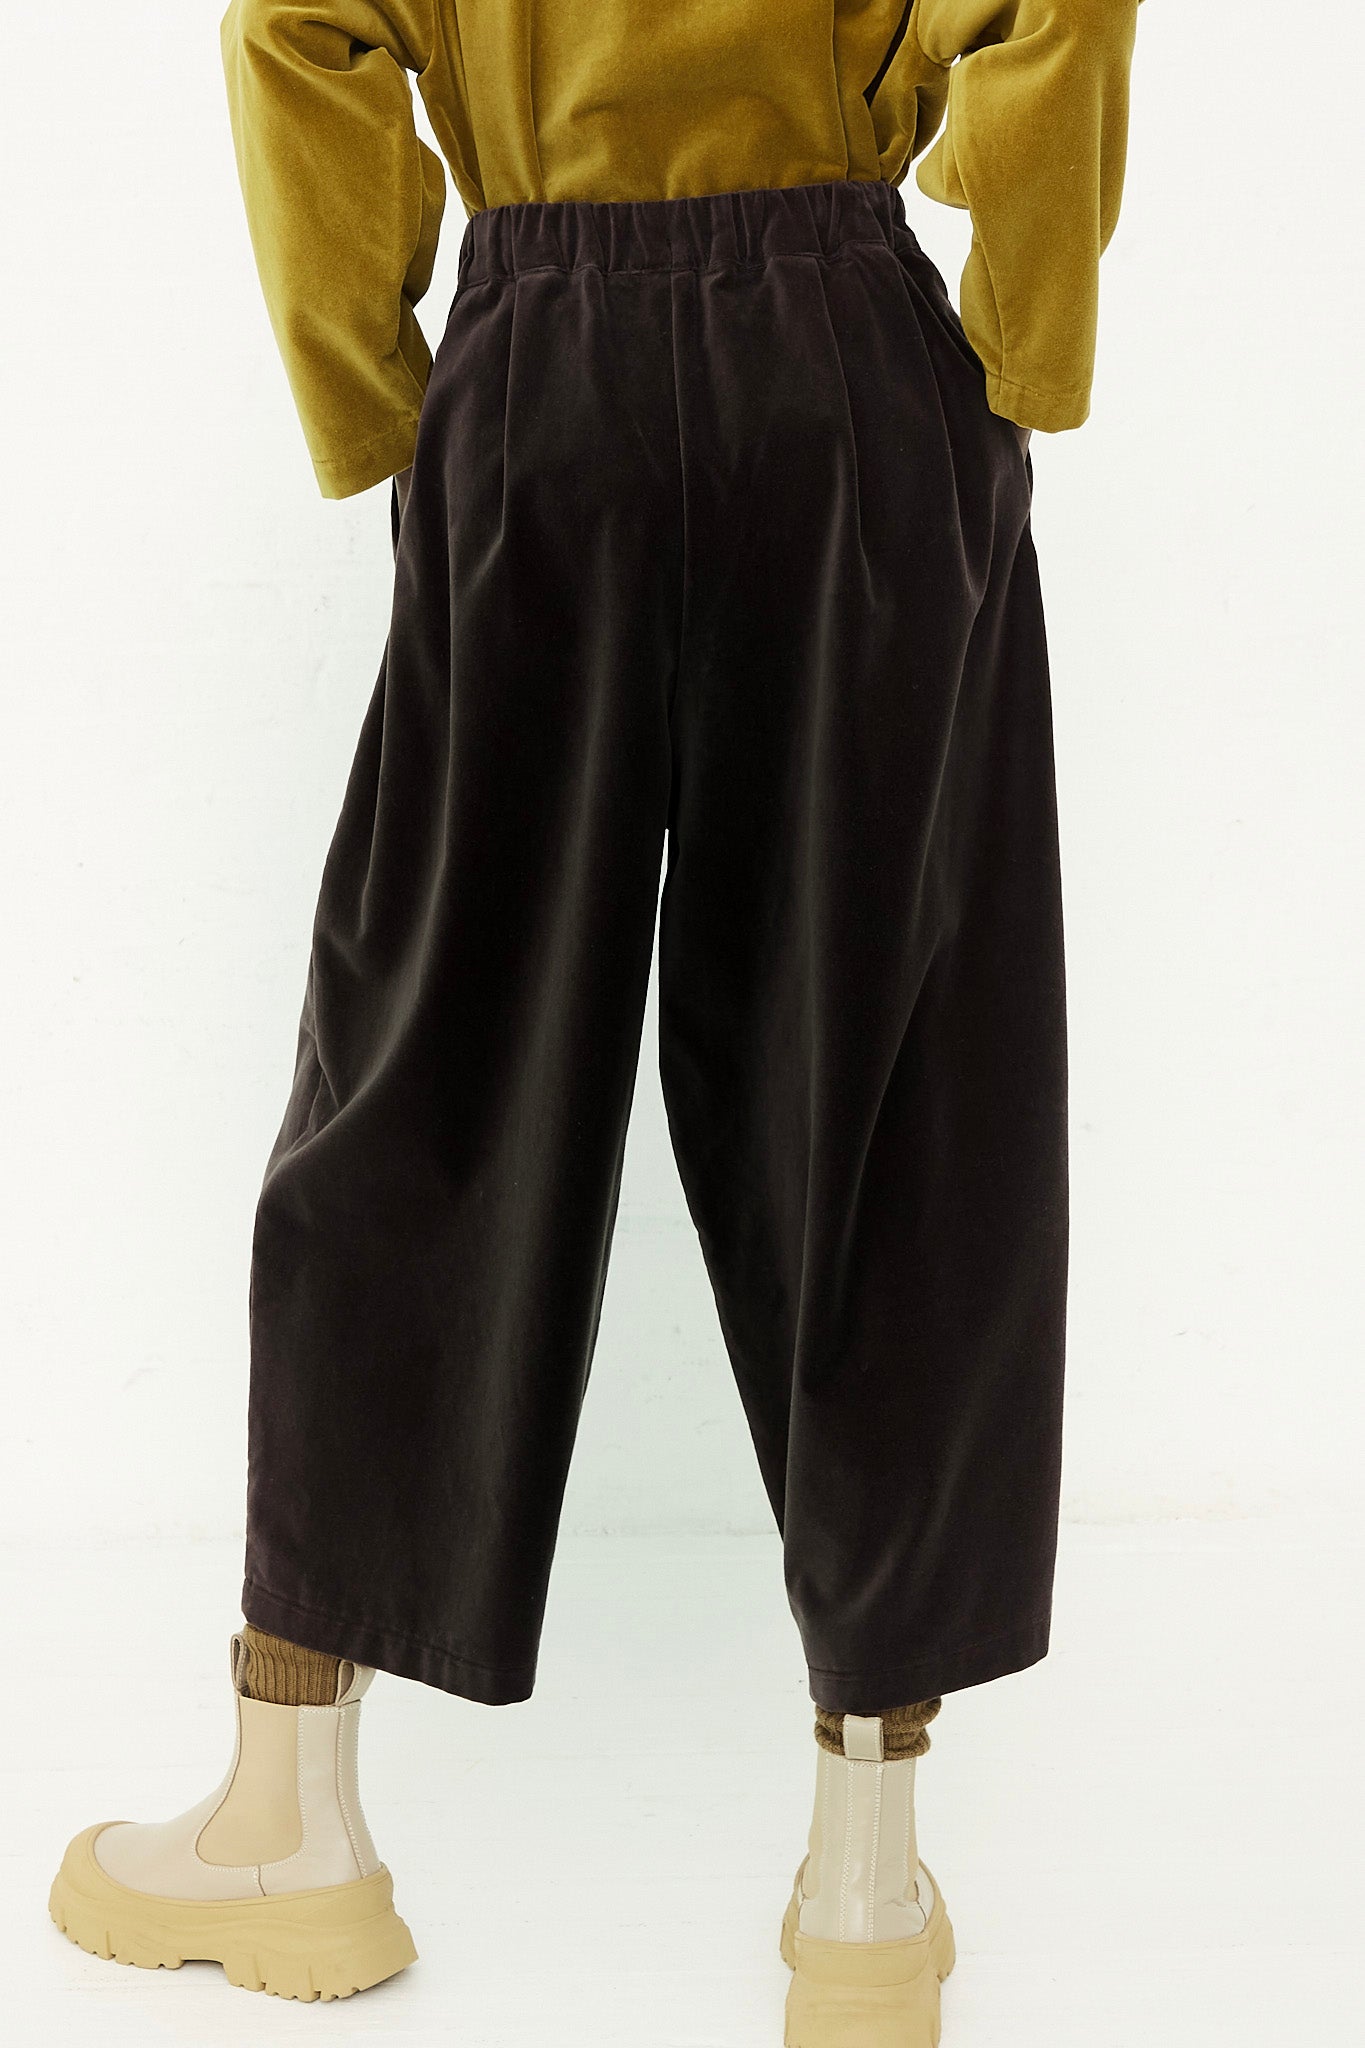 The back view of a woman wearing a yellow shirt and Black Crane Cotton Velveteen Wide Pants in Sumi Black with an elasticated waist.